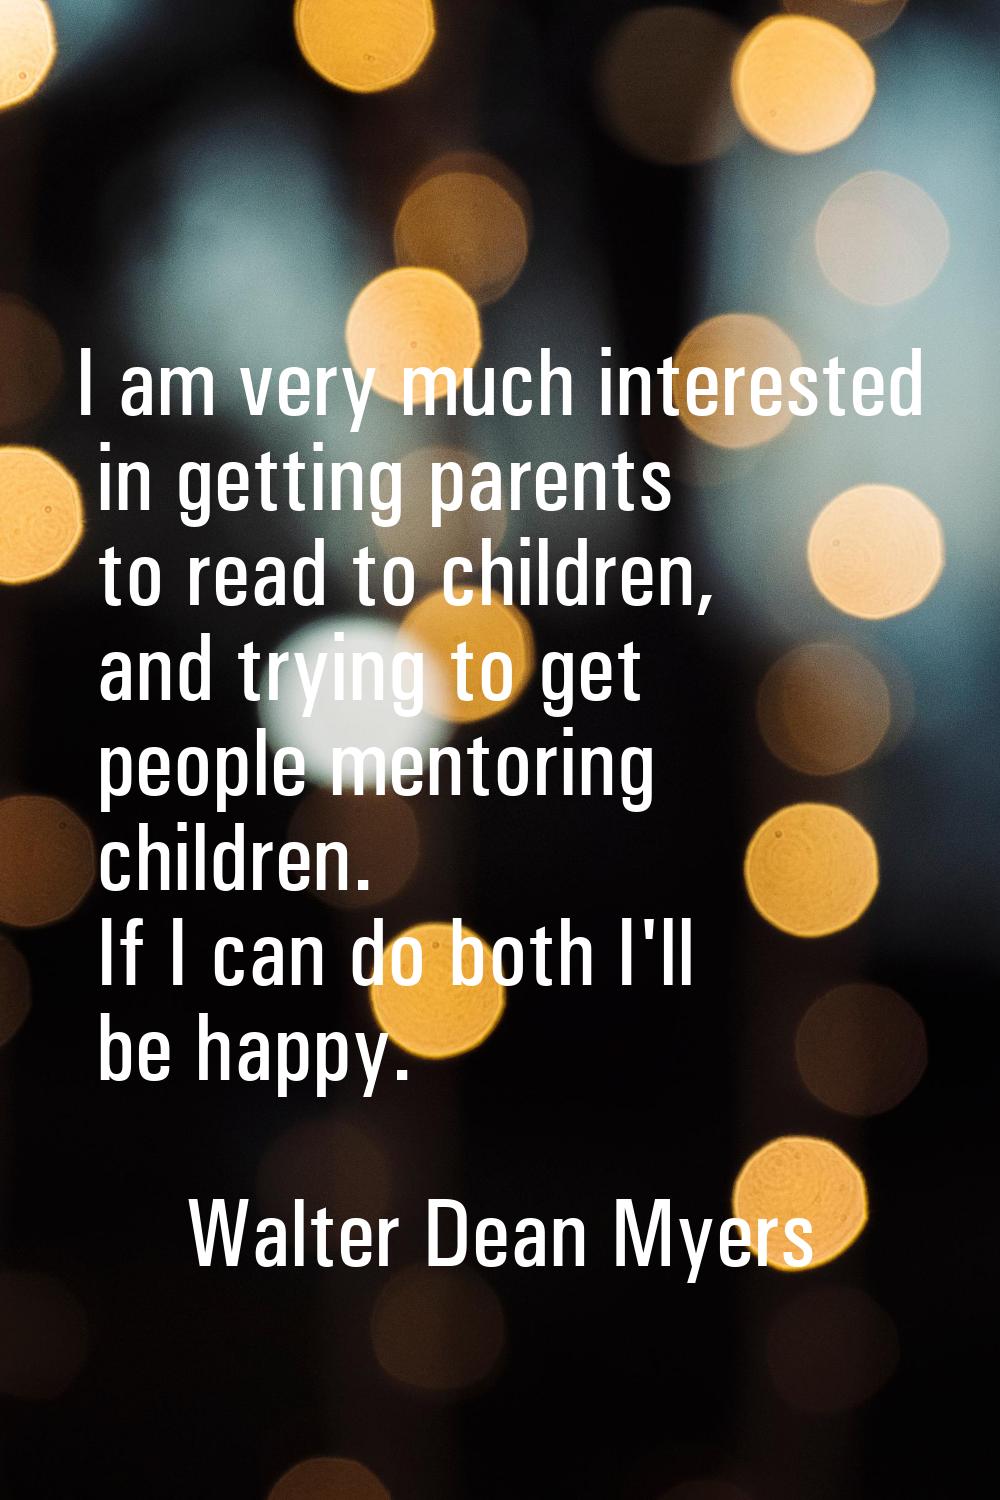 I am very much interested in getting parents to read to children, and trying to get people mentorin